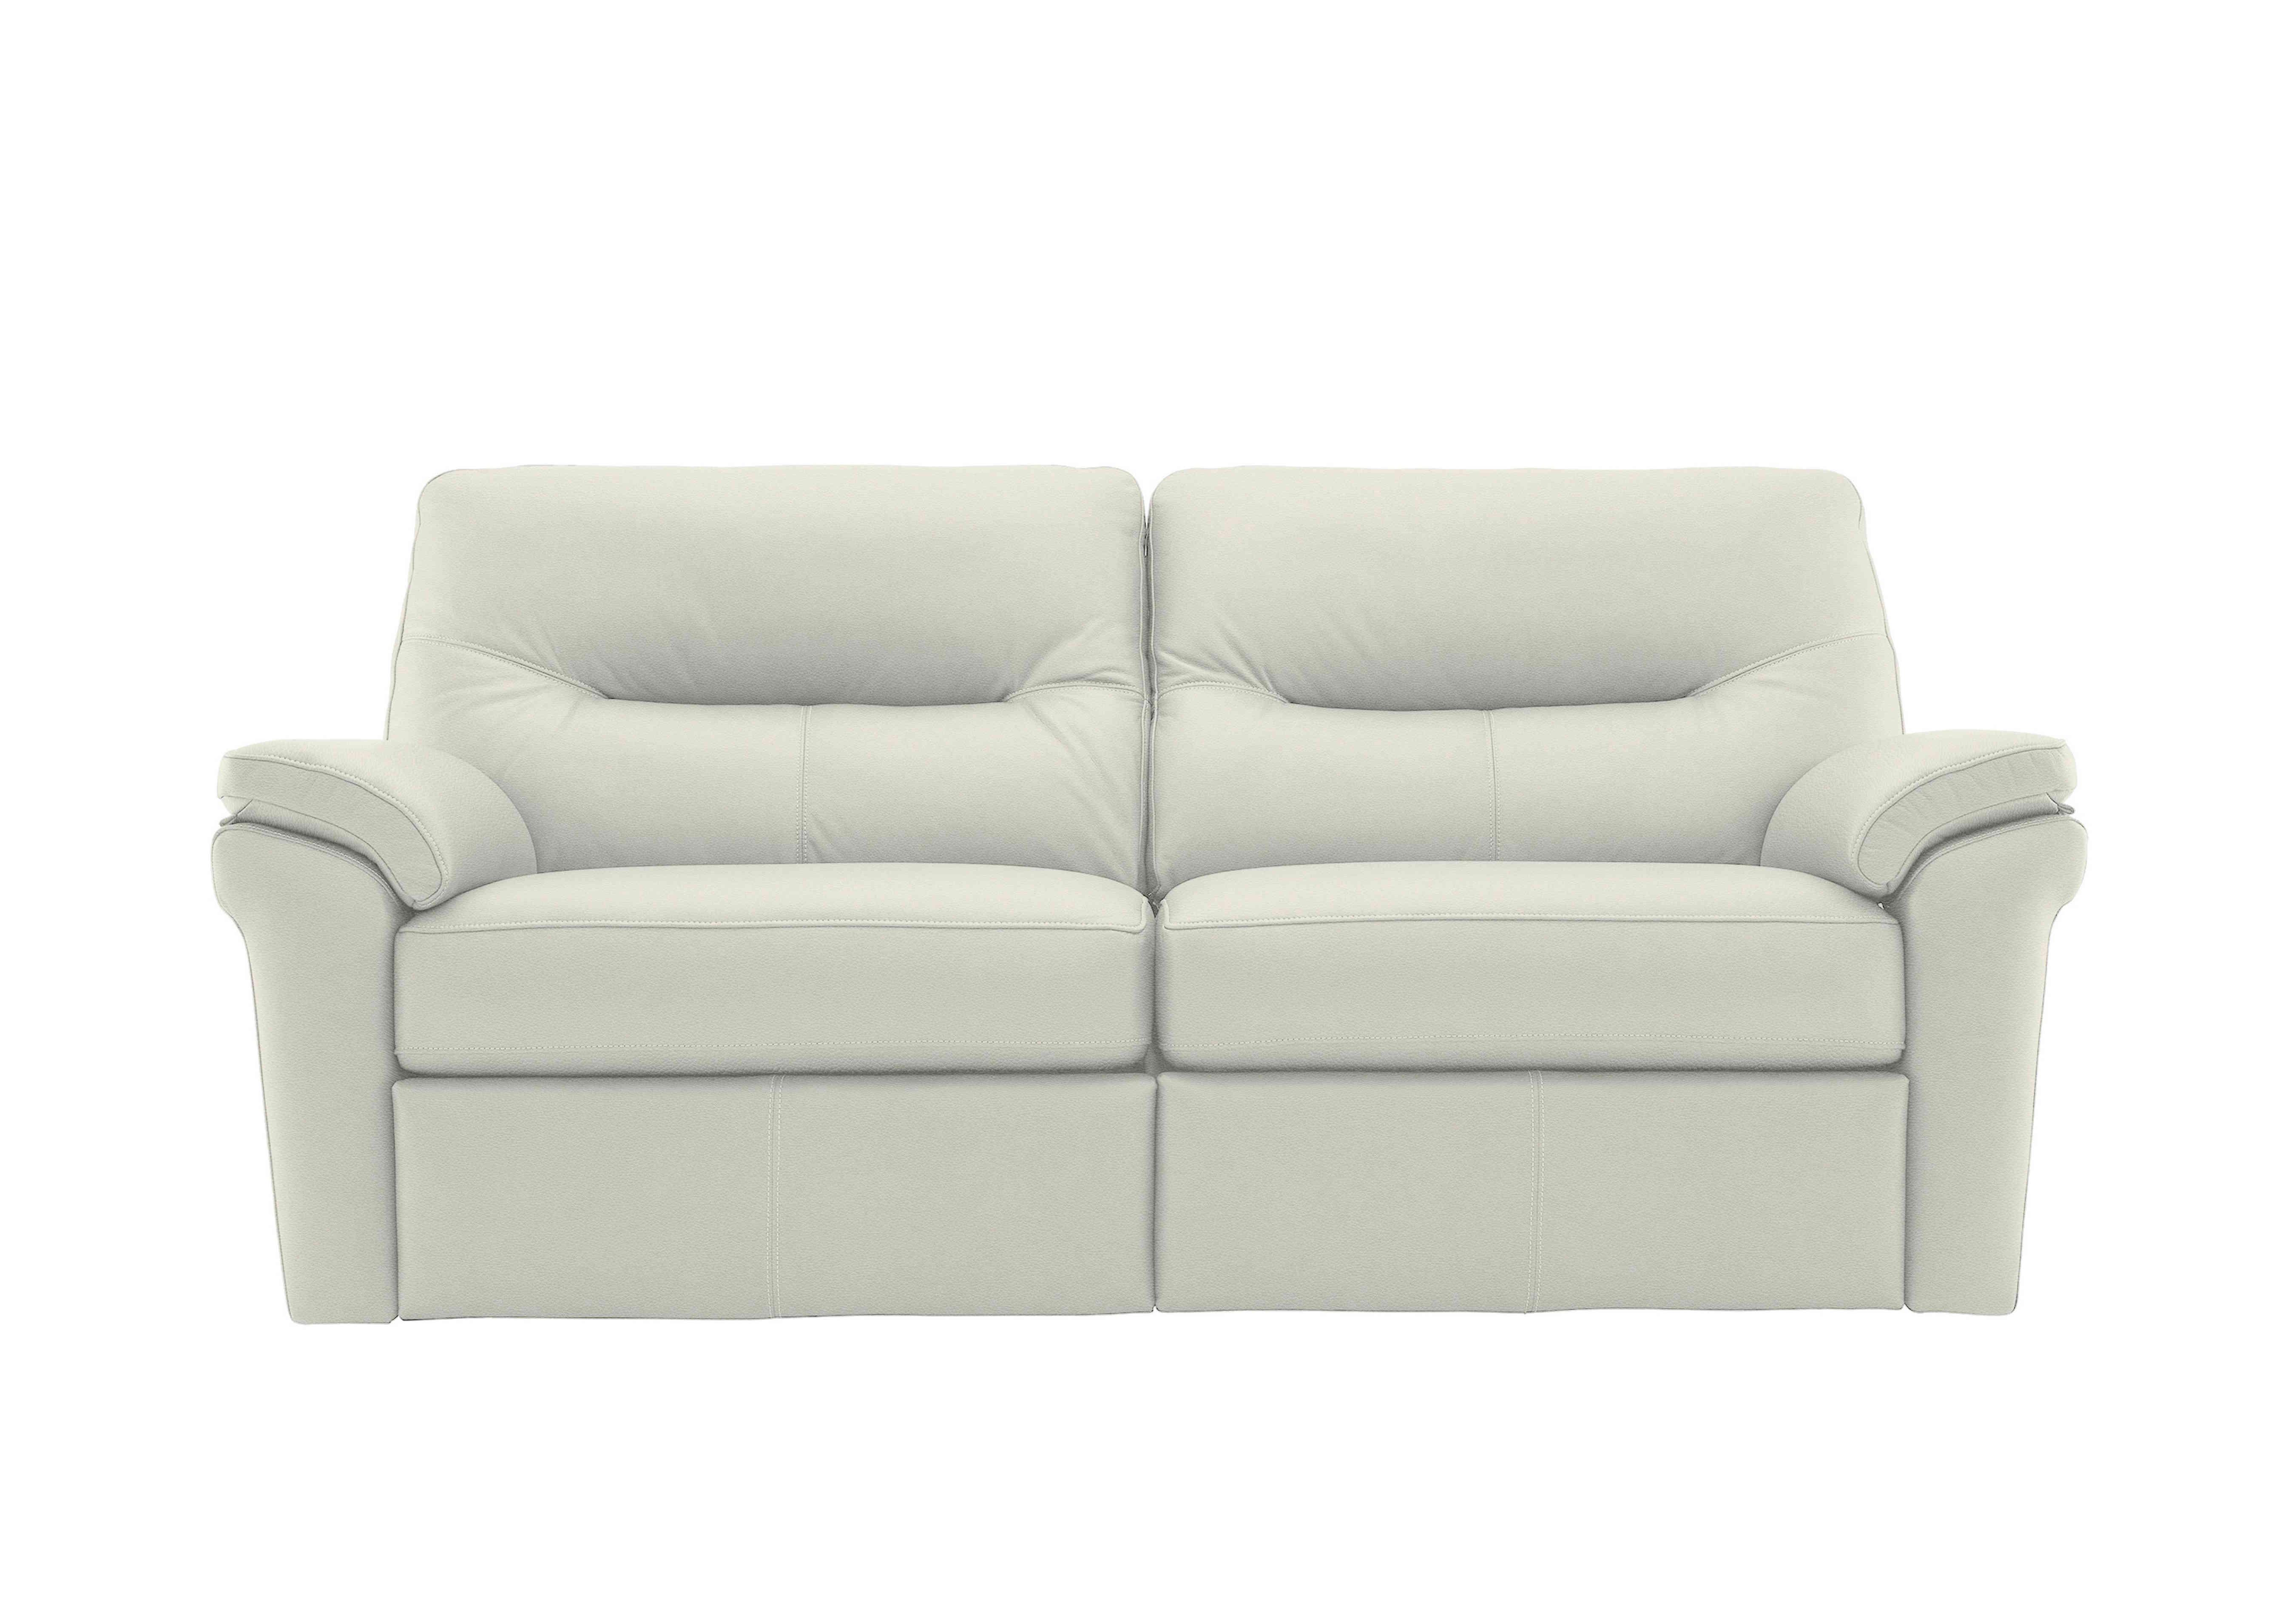 Seattle 3 Seater Leather Sofa in H005 Oxford Chalk on Furniture Village